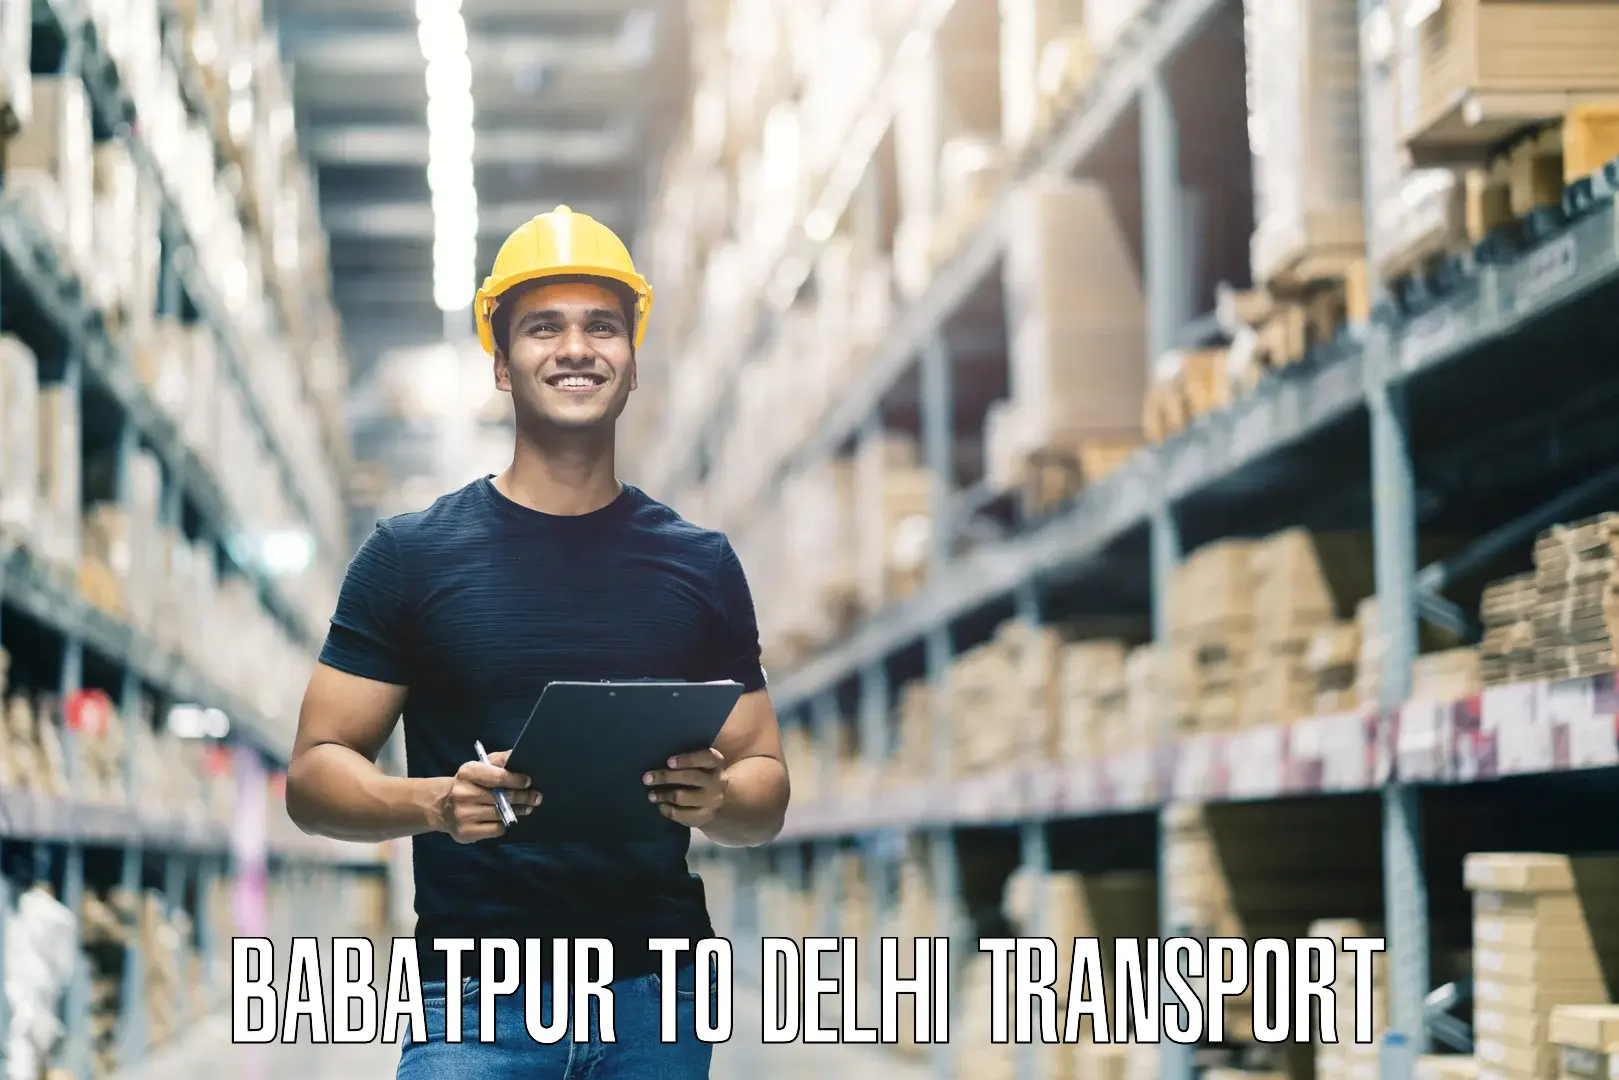 Daily transport service Babatpur to Delhi